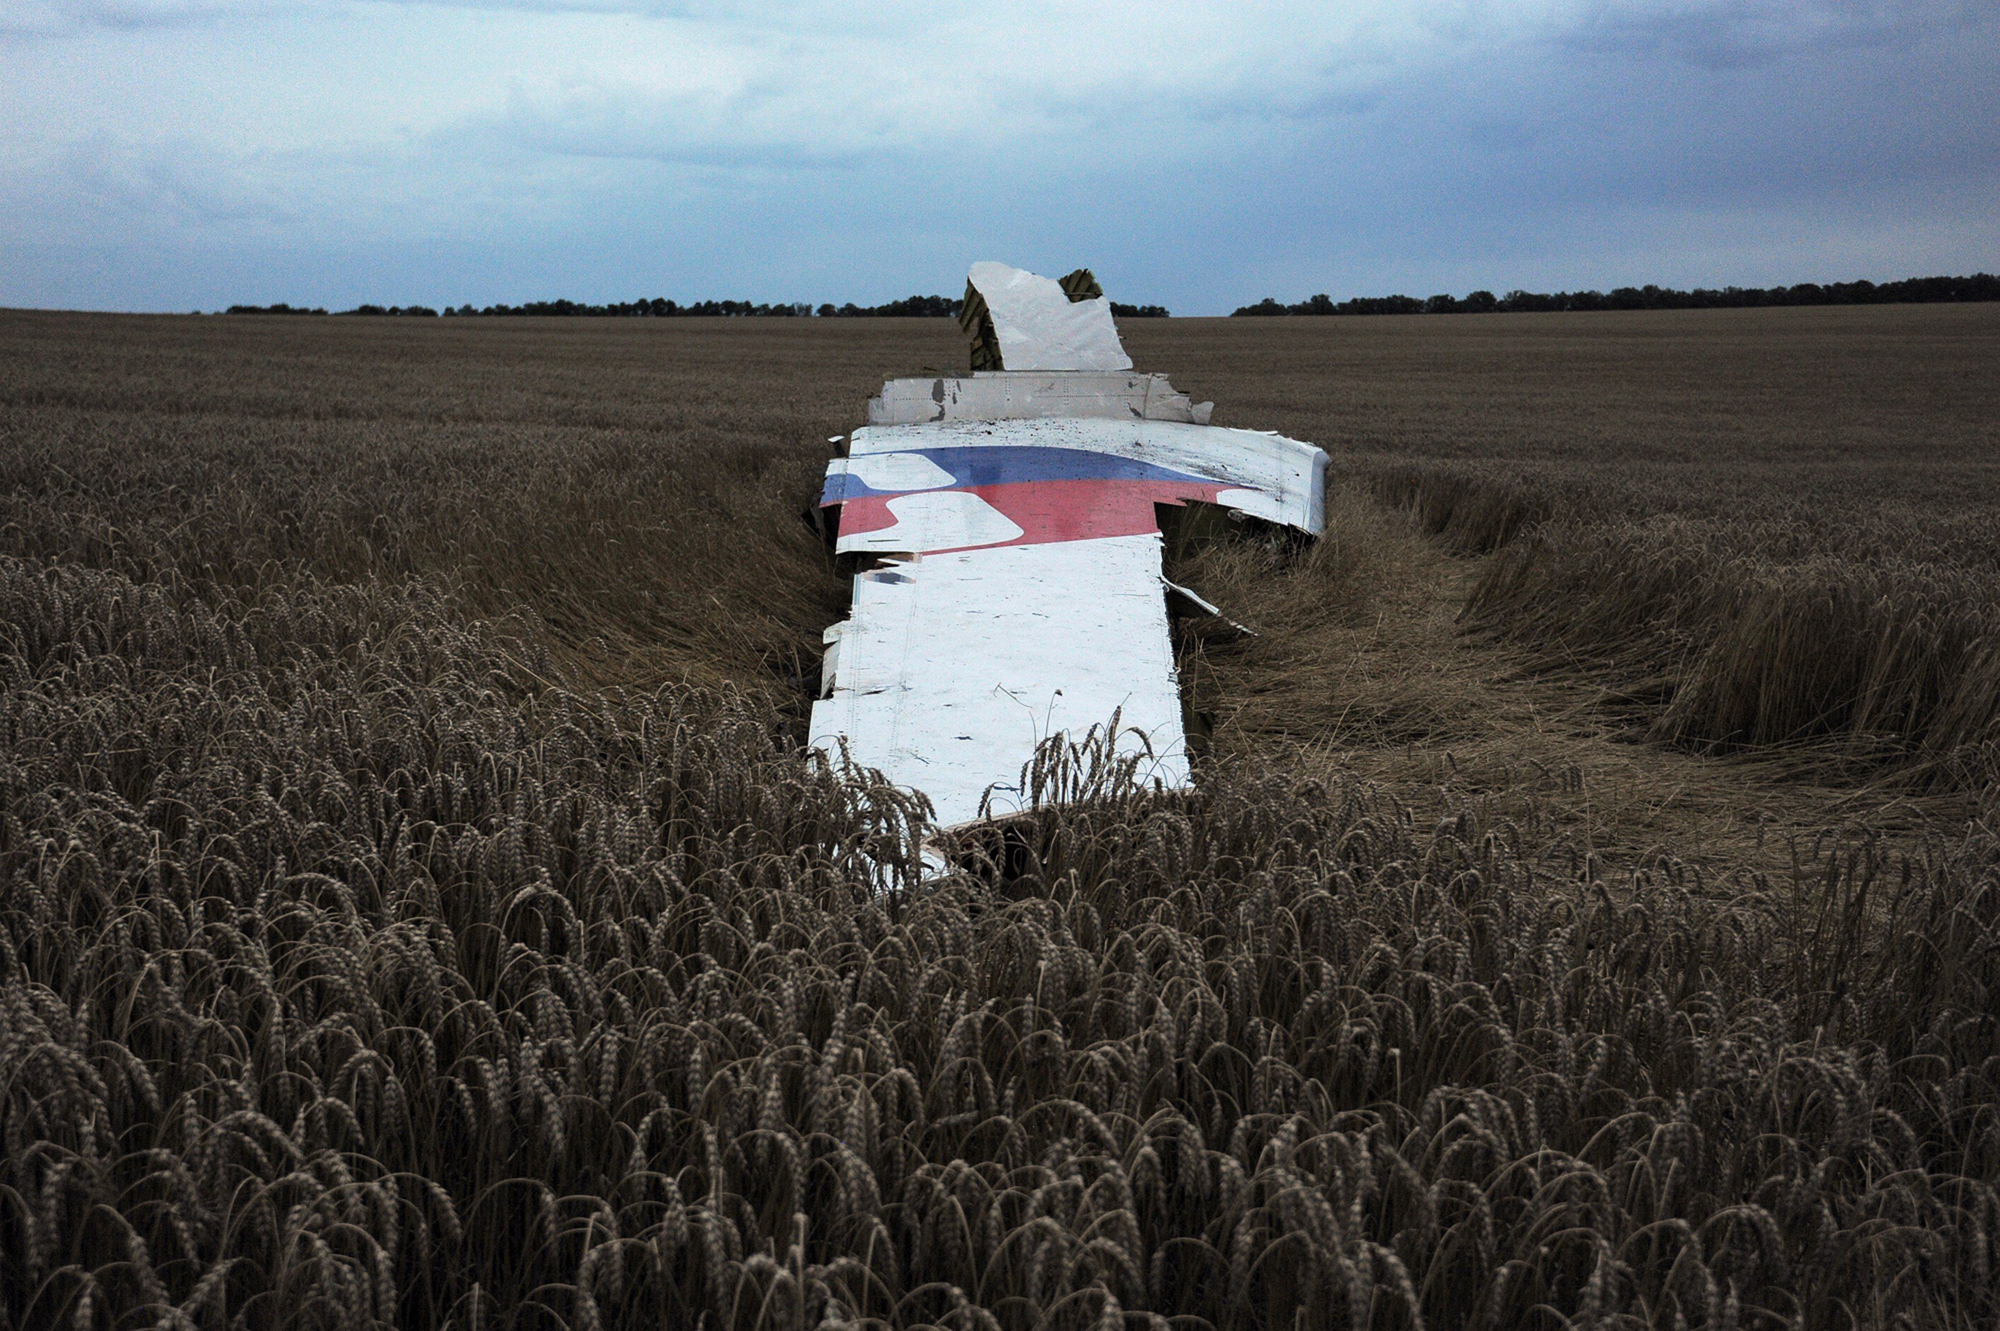 The wreckage of the Malaysian airliner carrying 295 people from Amsterdam to Kuala Lumpur after it crashed, near the town of Shaktarsk, in rebel-held east Ukraine, July 17, 2014.